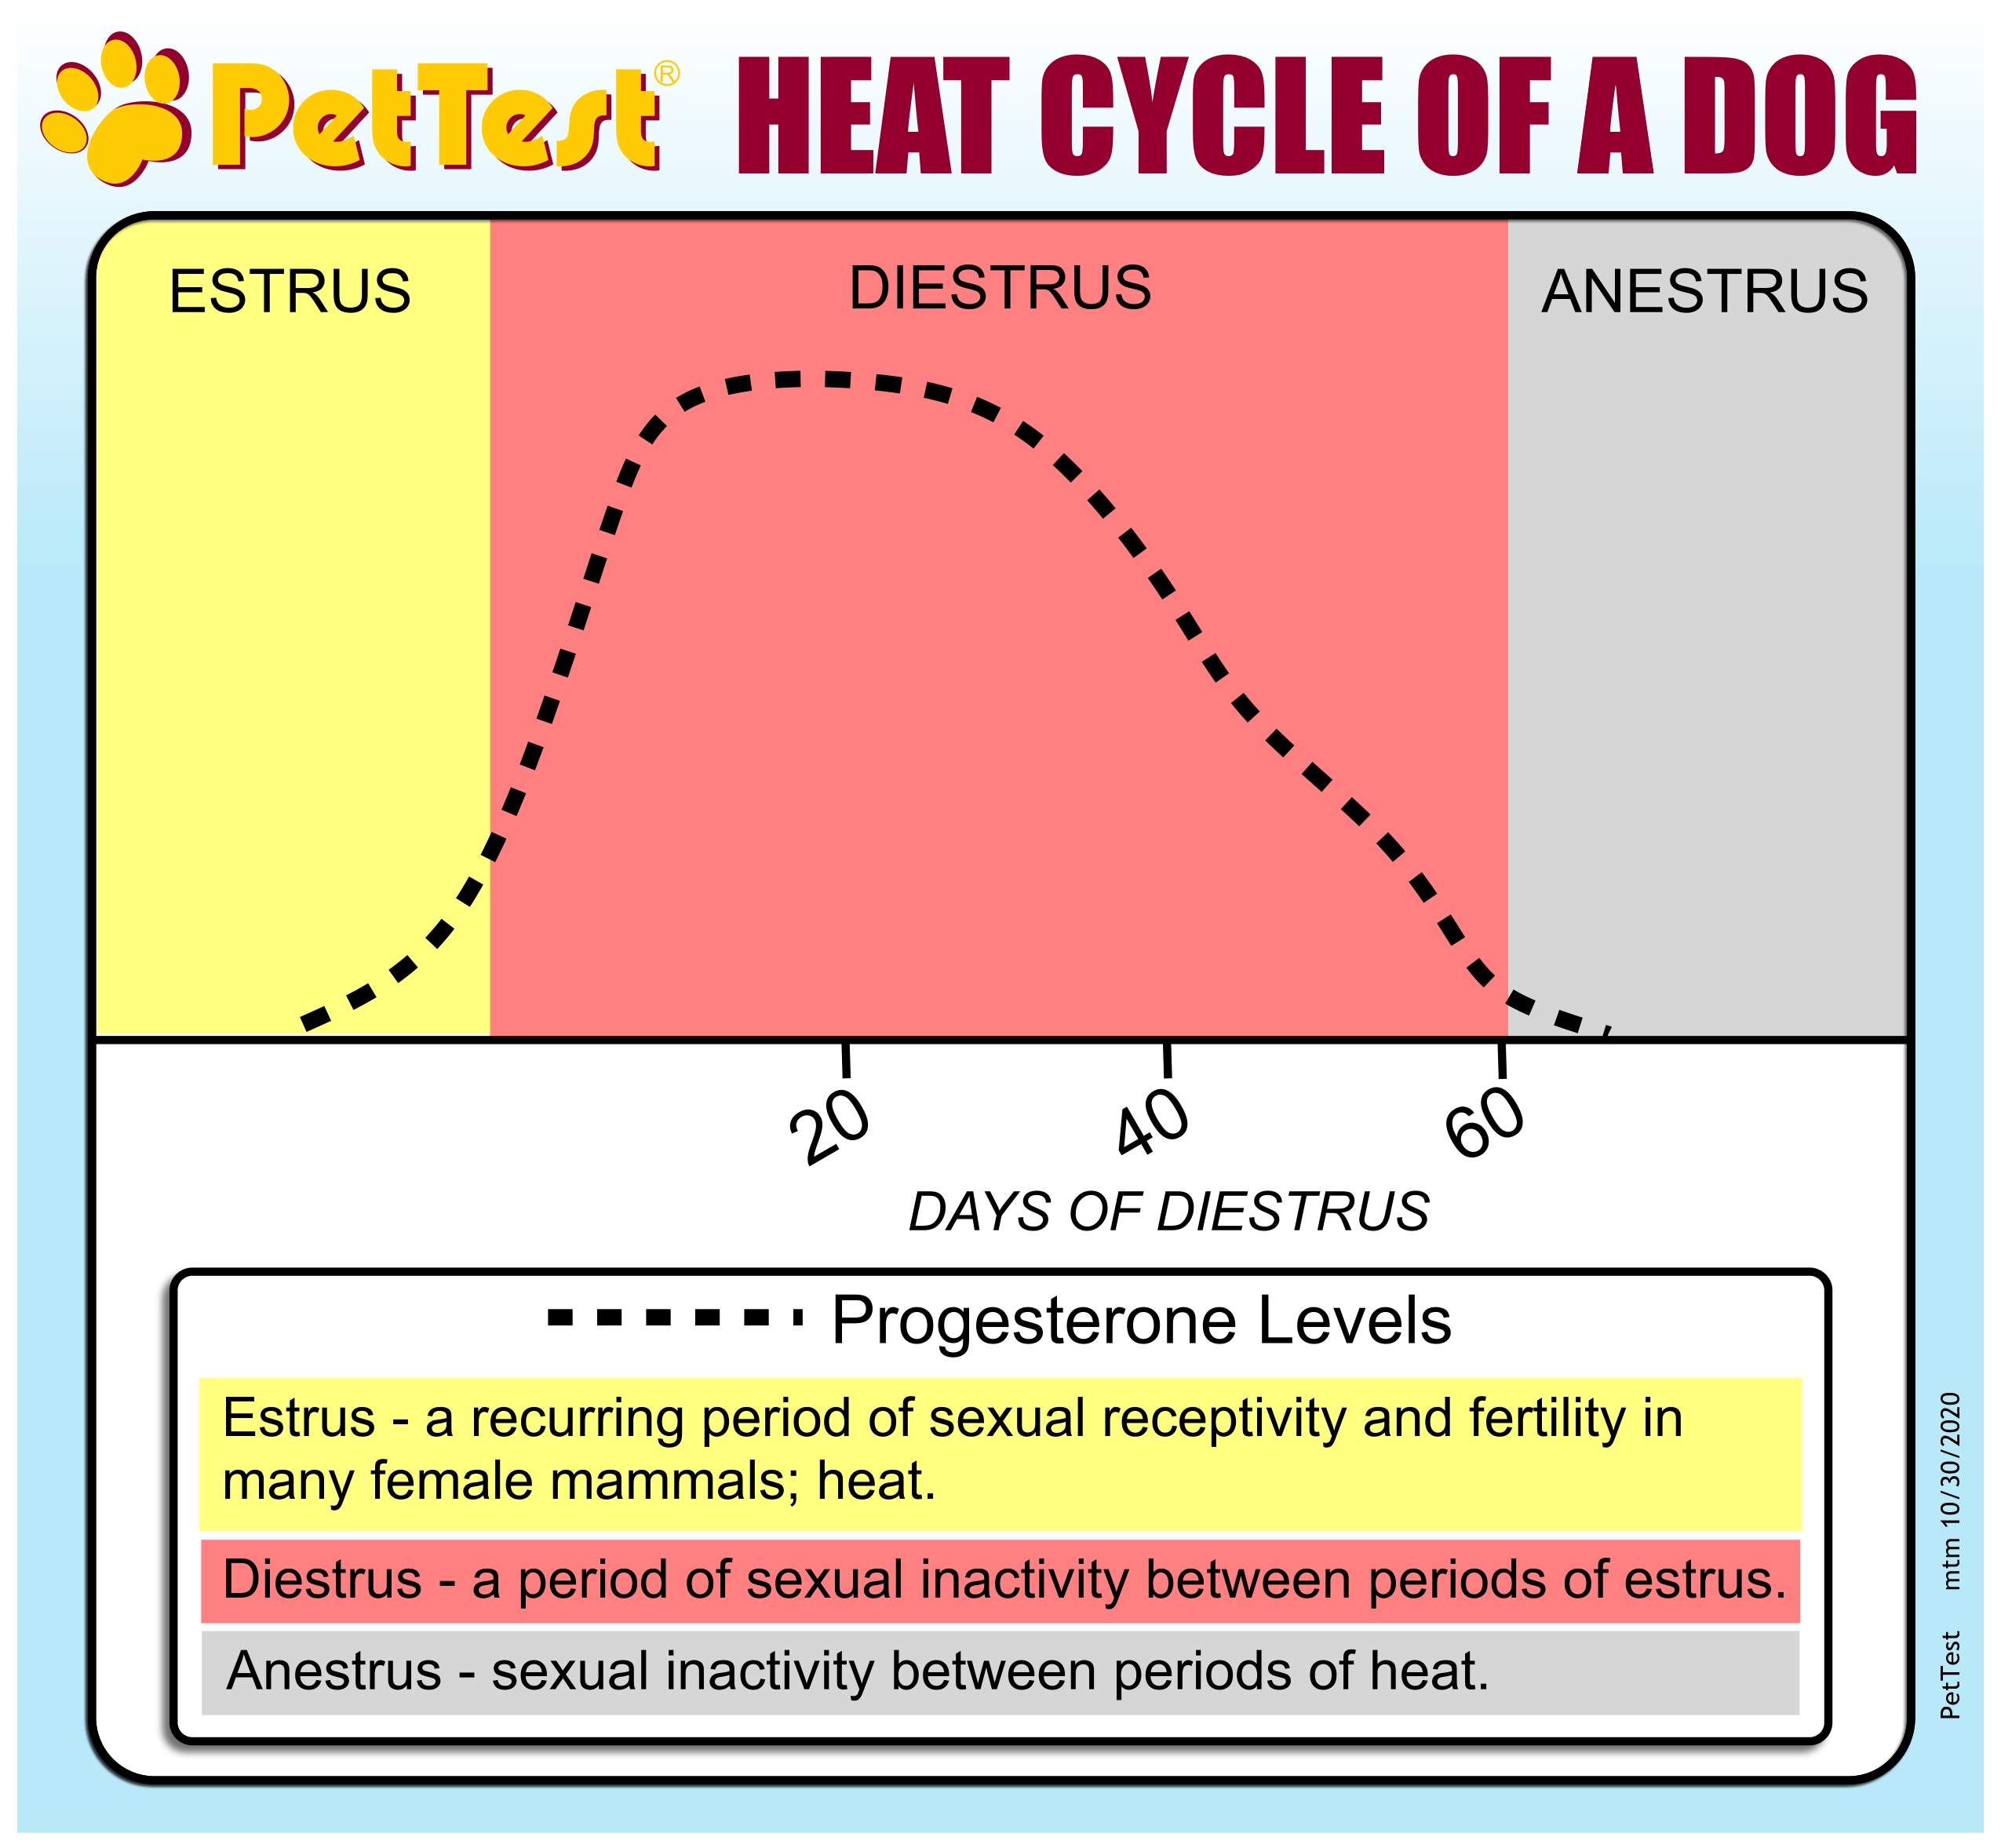 How Fast Do Progesterone Levels Rise In Dogs